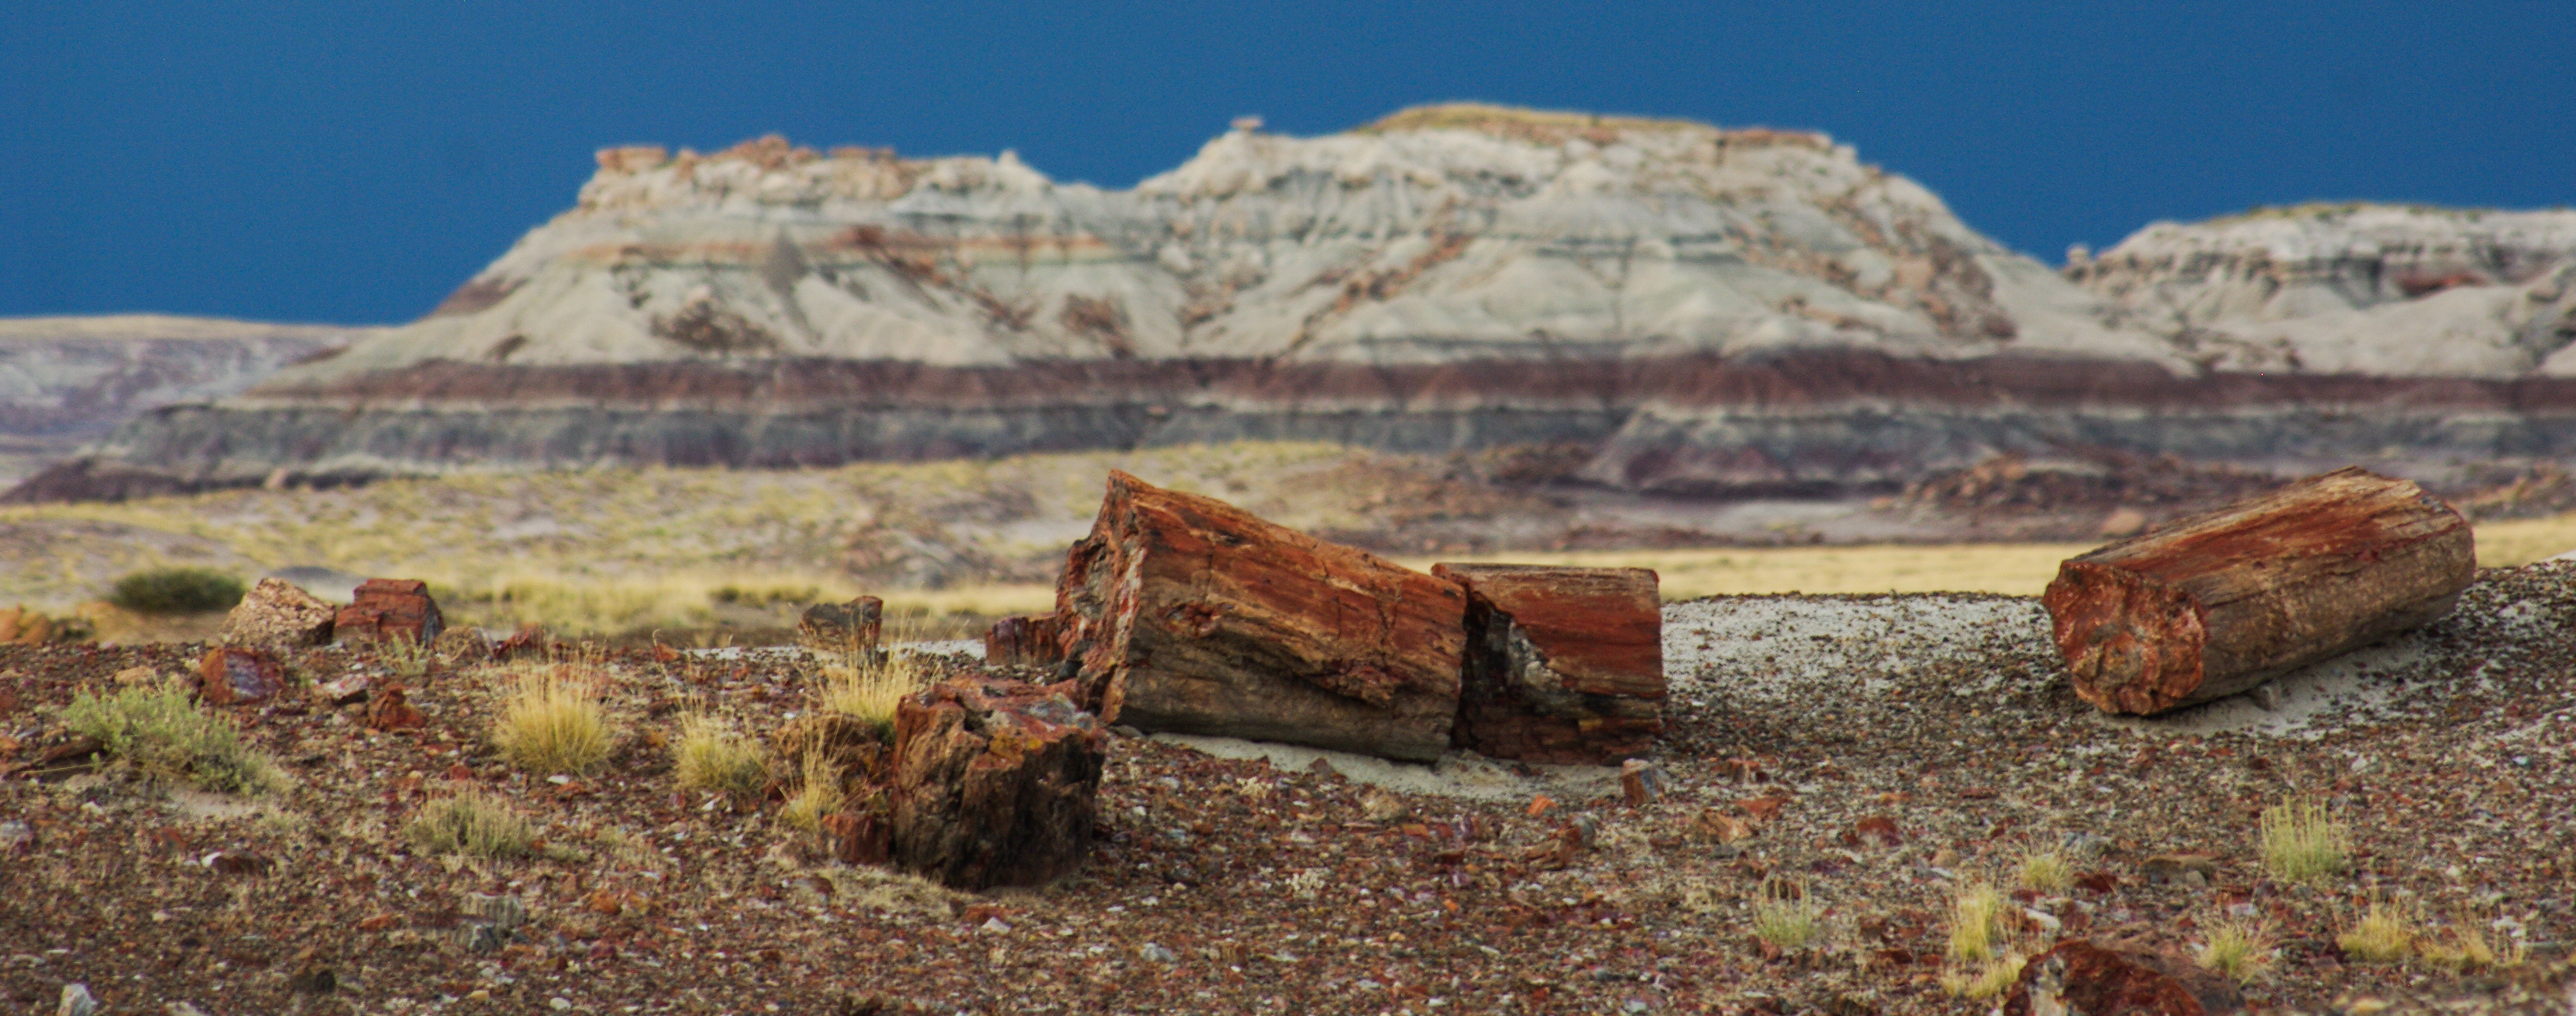 Many petrified logs are scattered in front of the blue grey badlands at Crystal Forest.